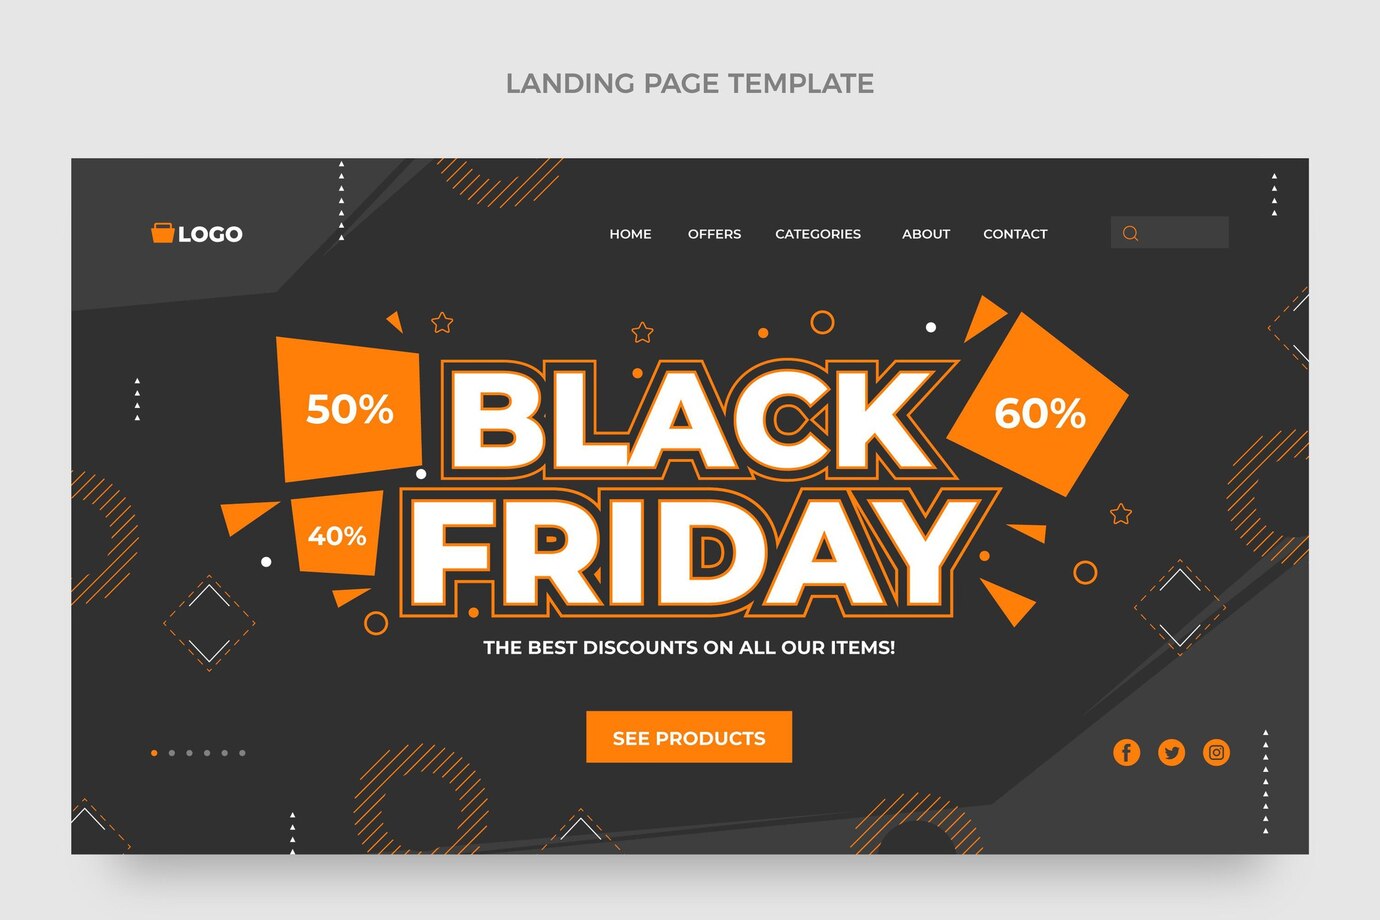 Flat Black Friday Landing Page Template 23 2149095317